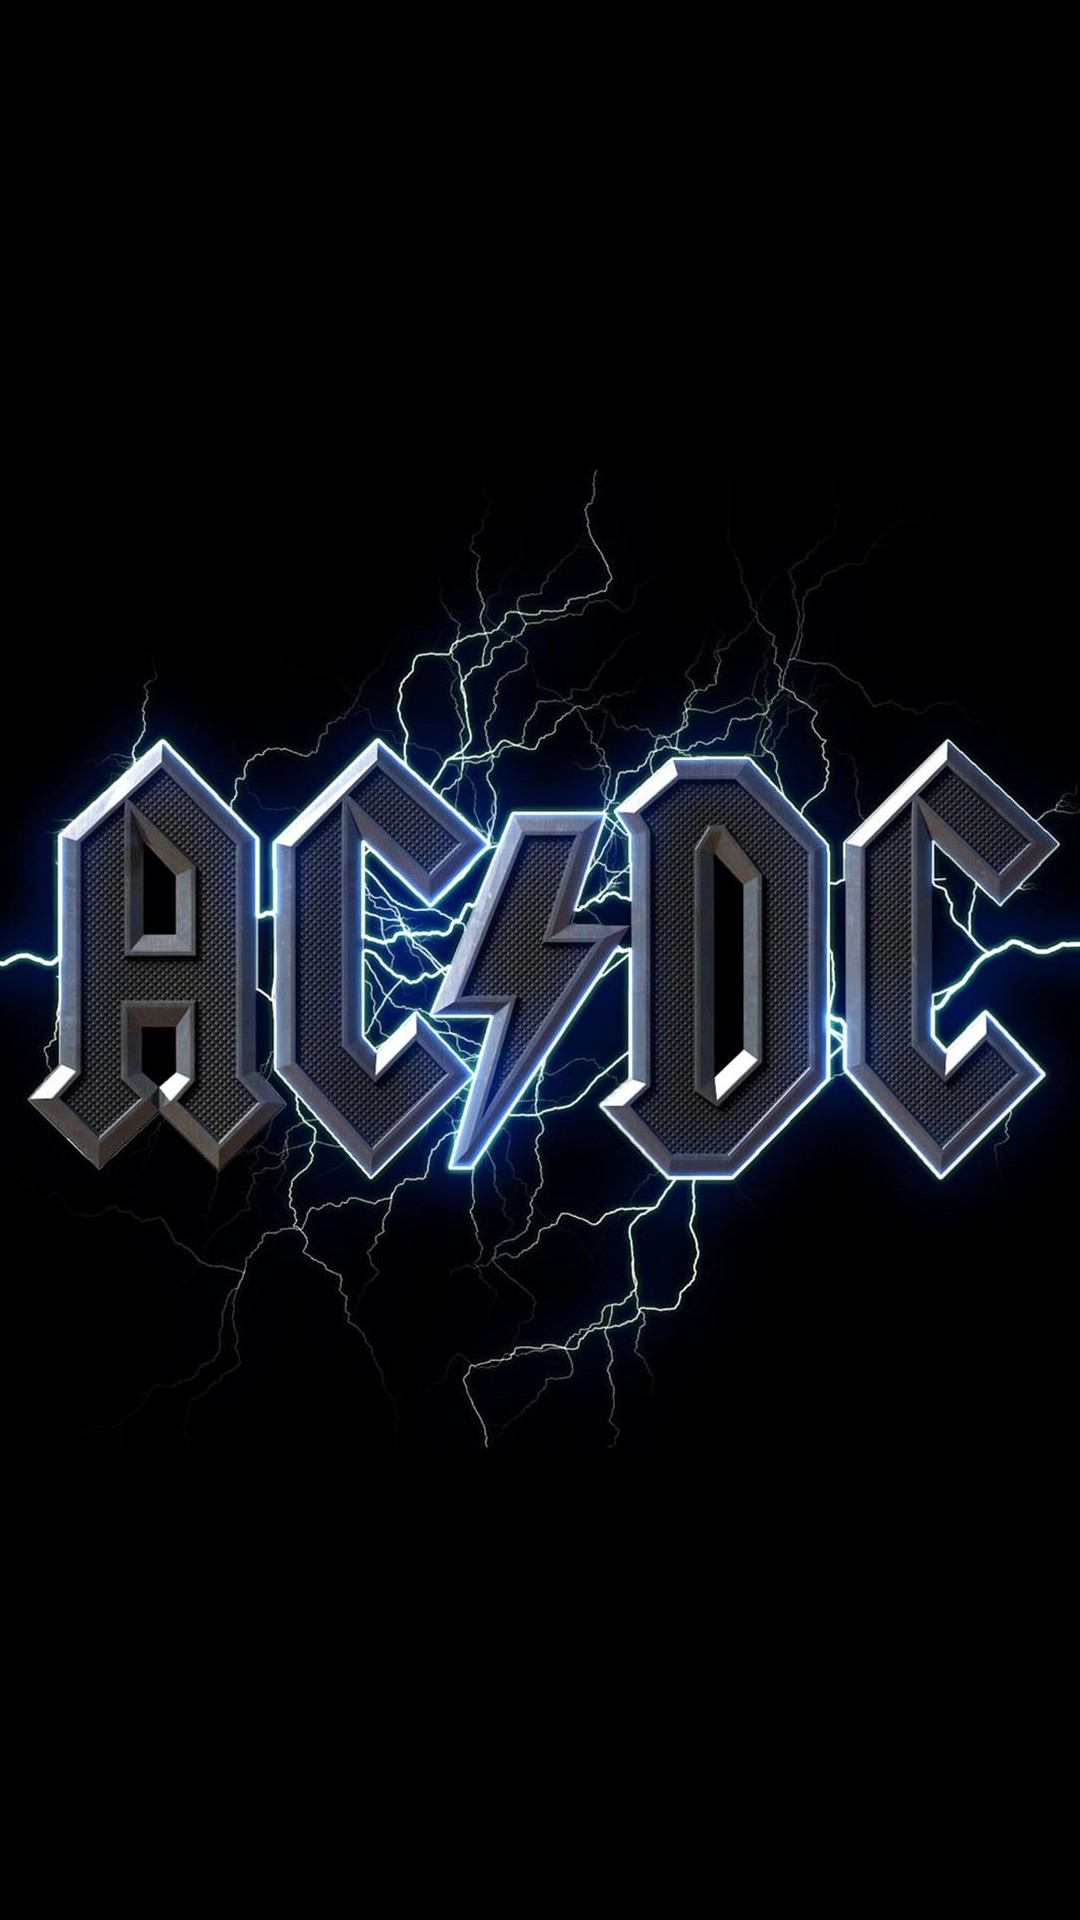 ac dc wallpapers iphone,text,font,logo,brand,graphics.